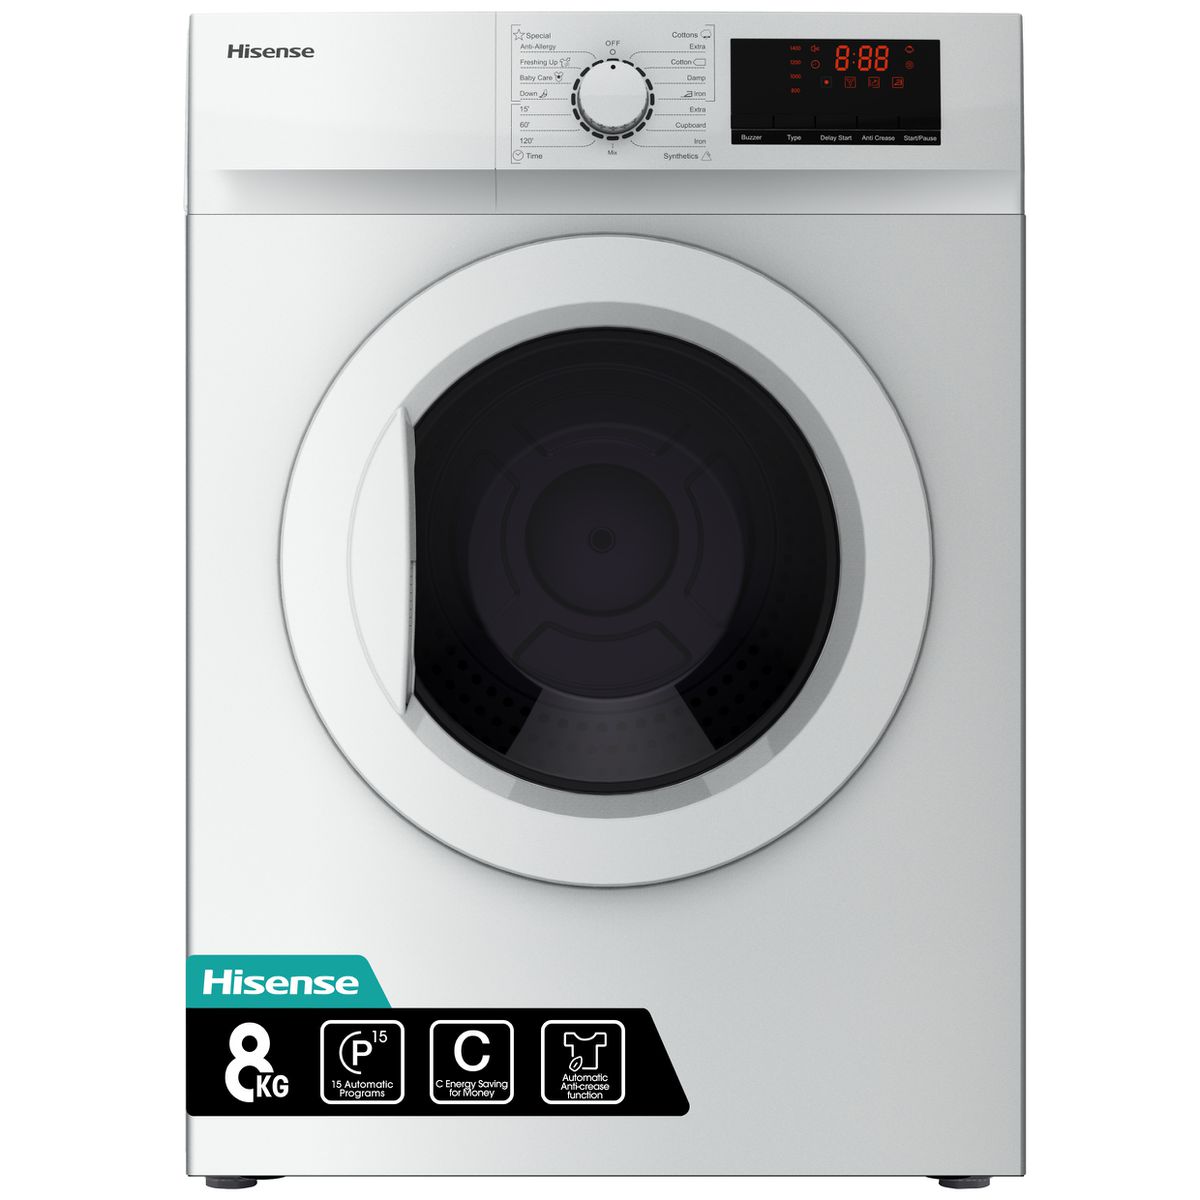 Hisense - Vented Tumble Dryer 8kg - Silver Buy Online in Zimbabwe thedailysale.shop